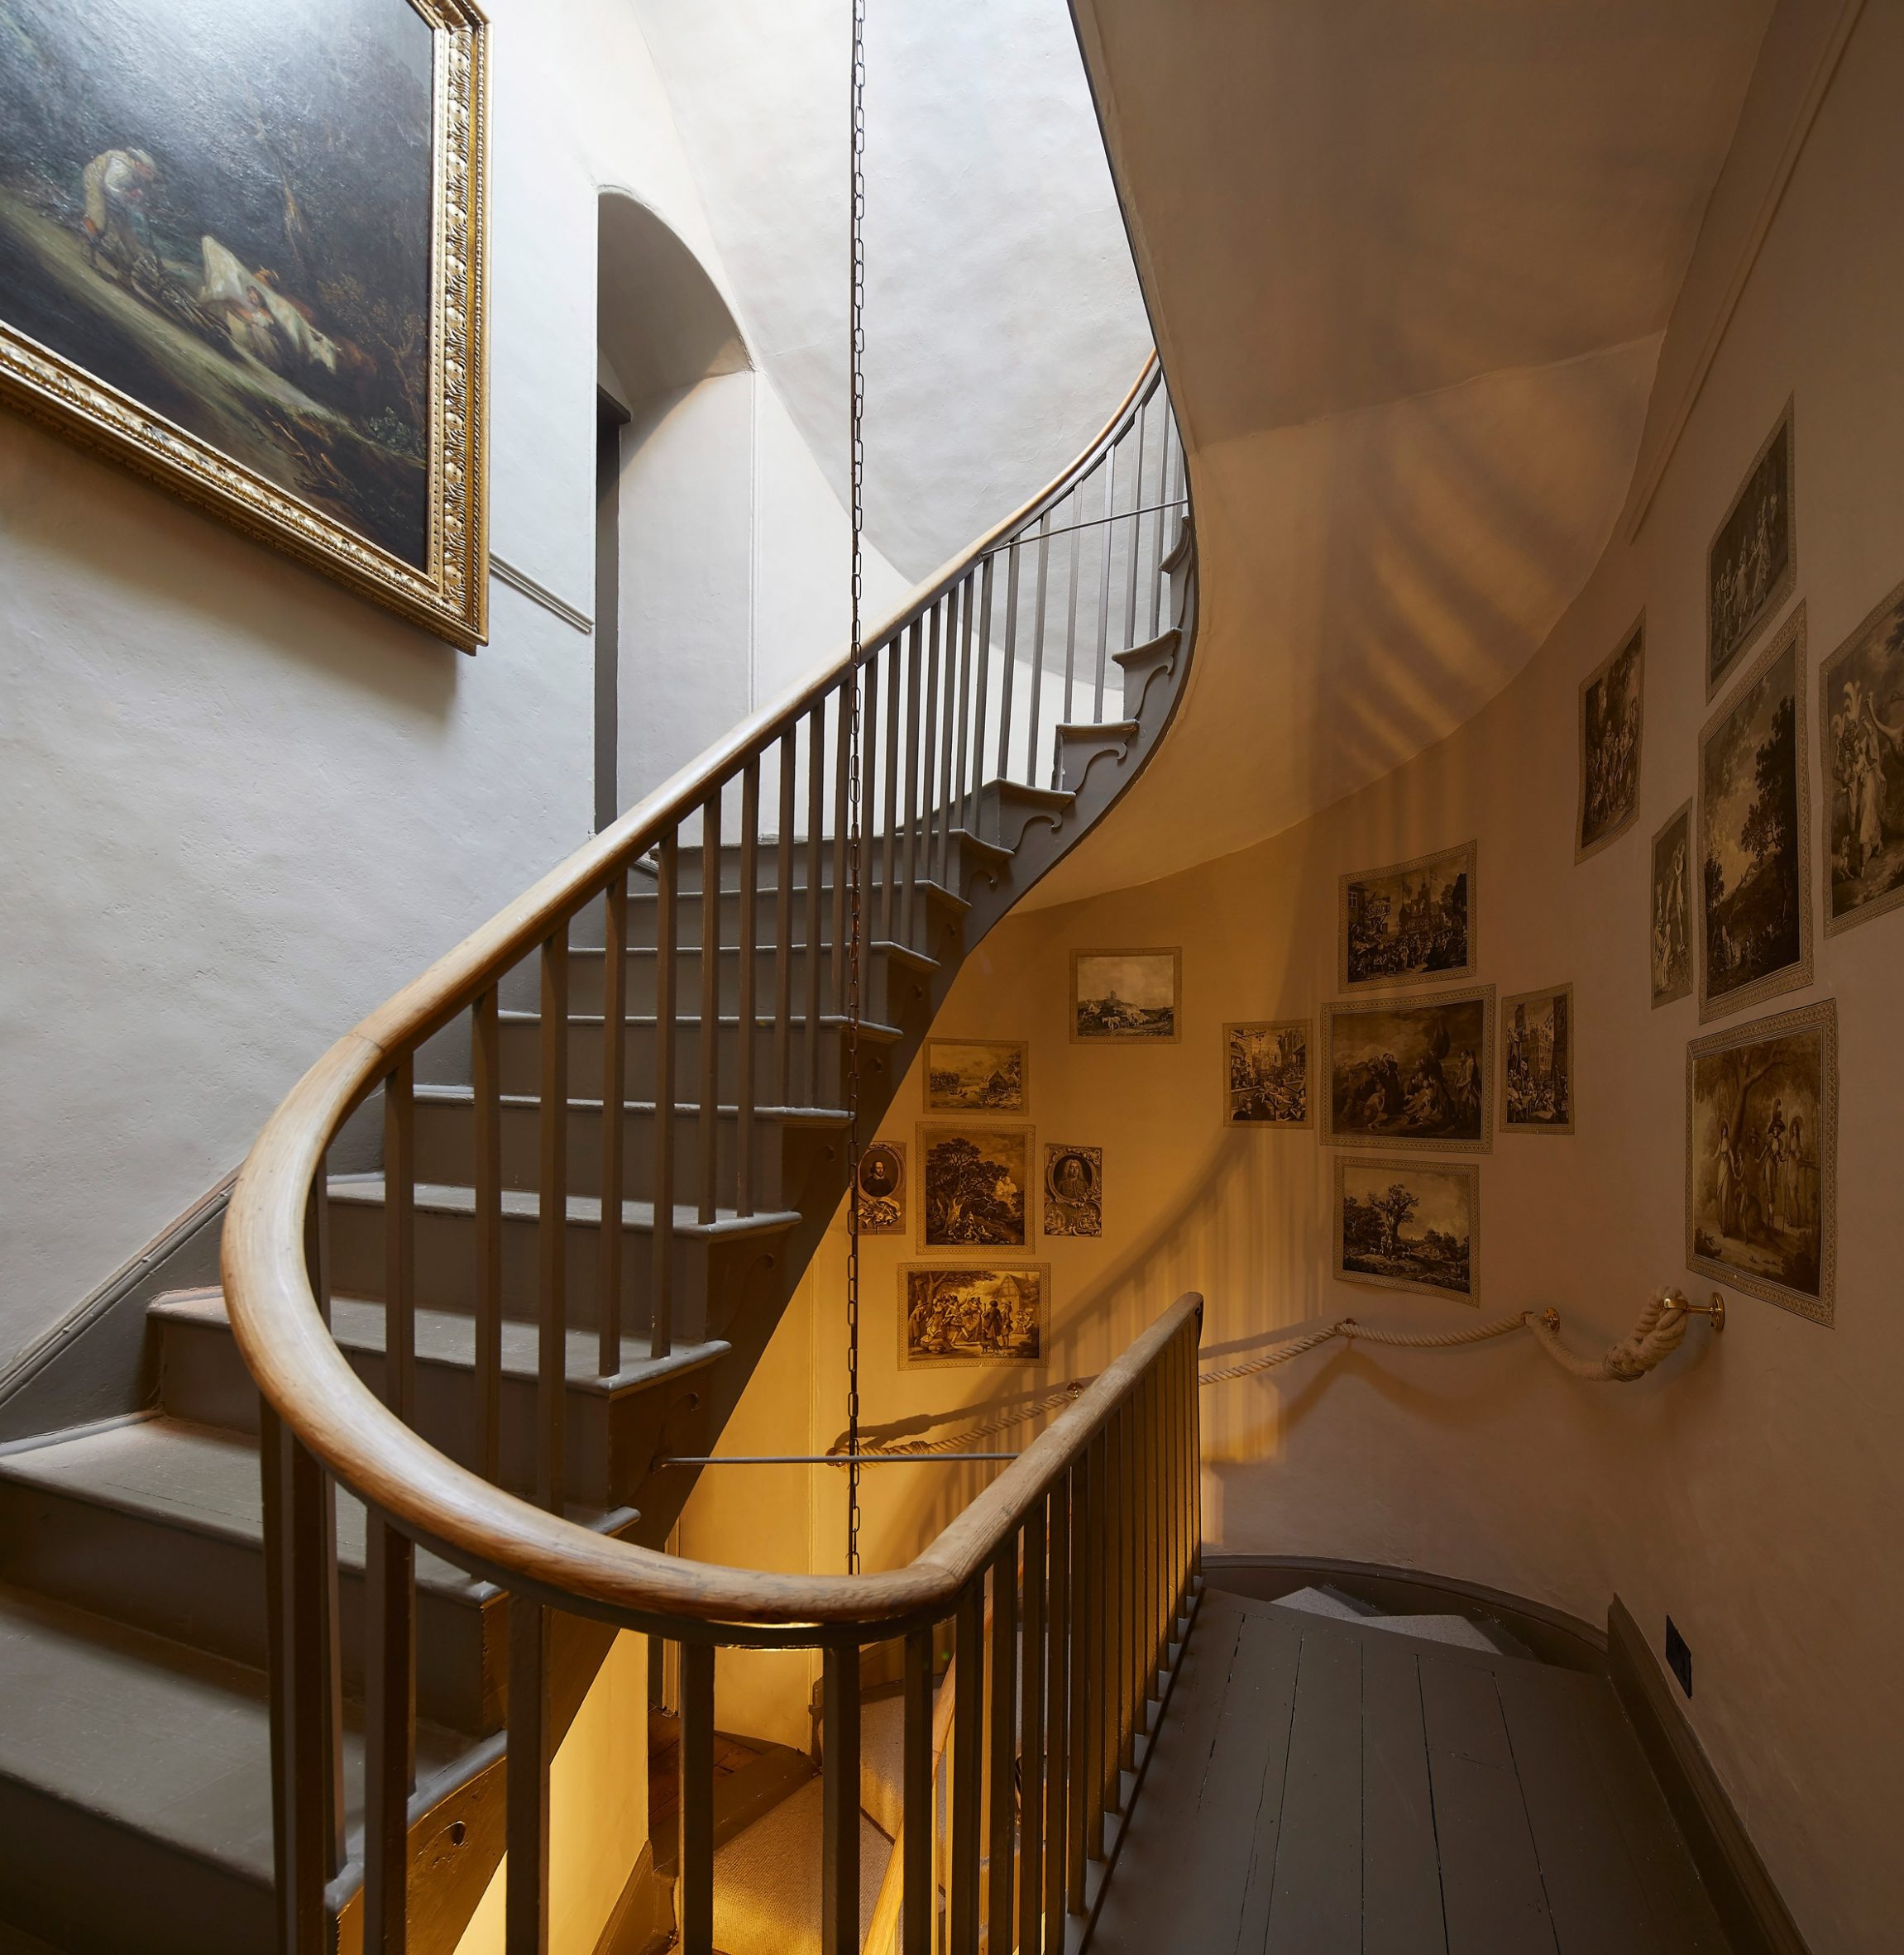 Photo of a gallery and stair well